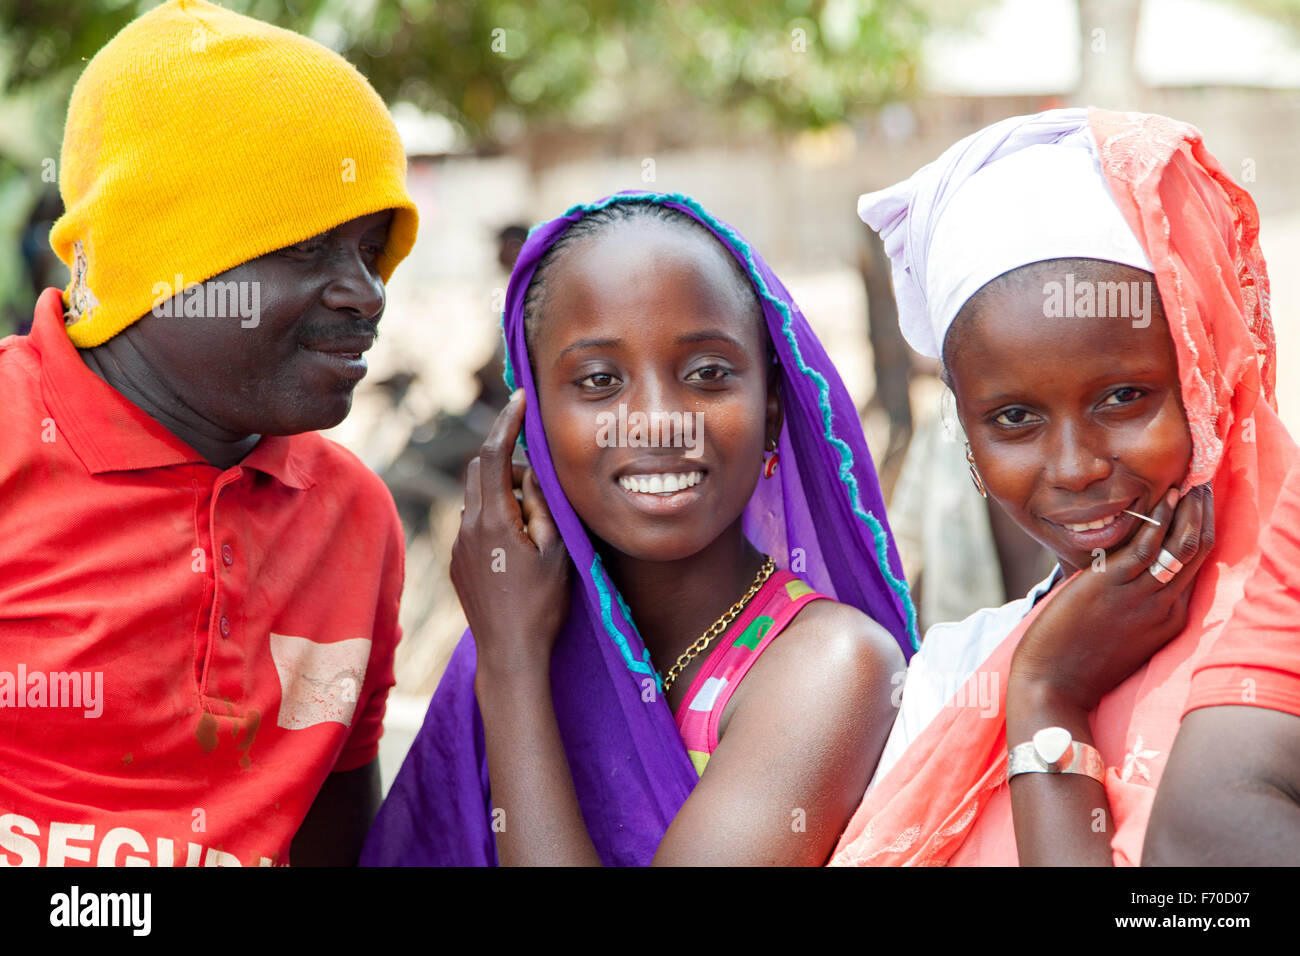 Gabu, Guinea-Bissau - May 10, 2014: Man trying to flirt with two African girls. Daily scenes from rural Guinea-Bissau Stock Photo